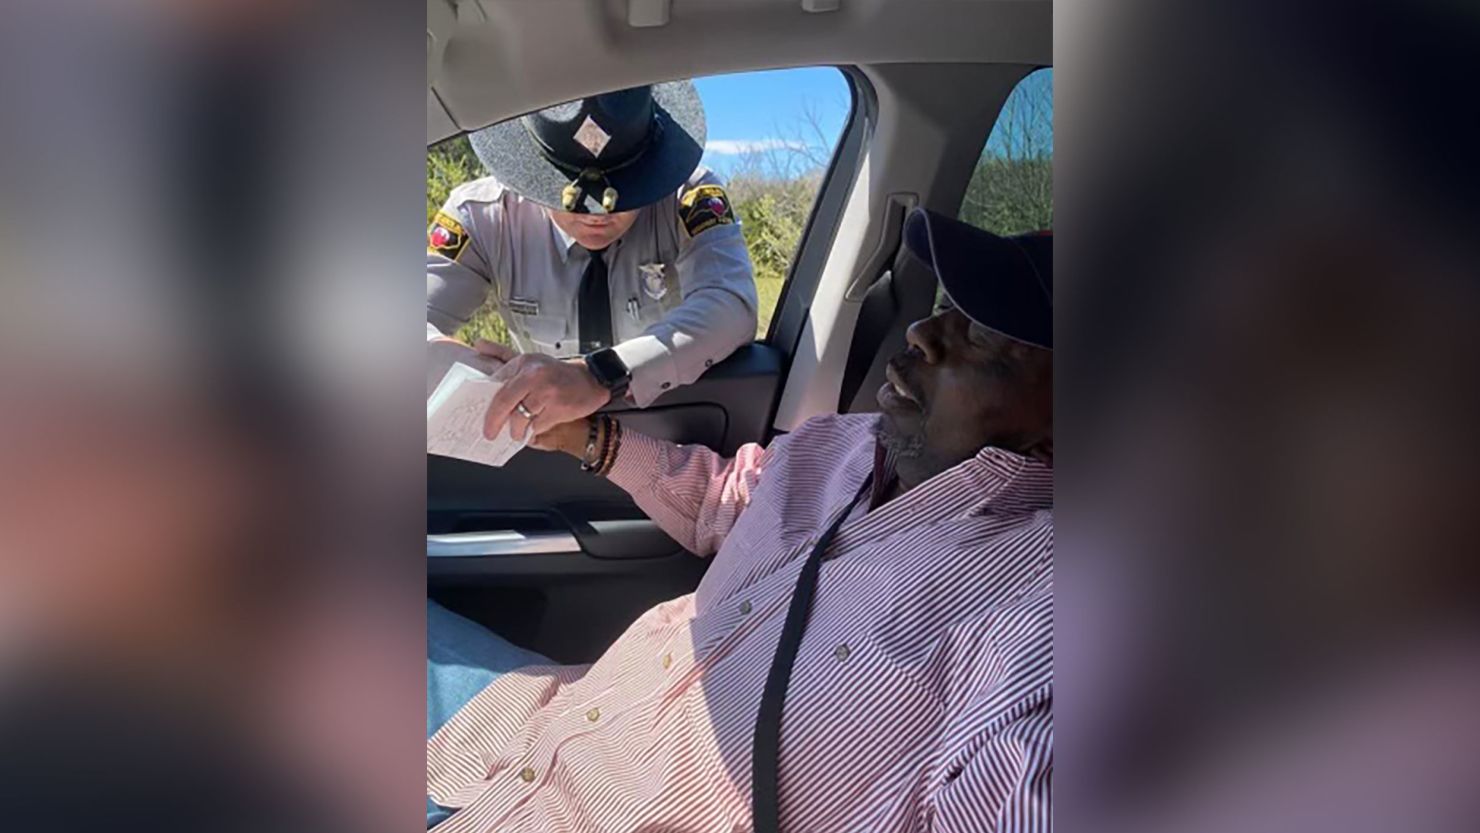 This routine traffic stop involving Anthony "Tony" Geddis, a passenger in a car driven by his daughter, and state trooper Jaret Doty turned into a viral encounter.